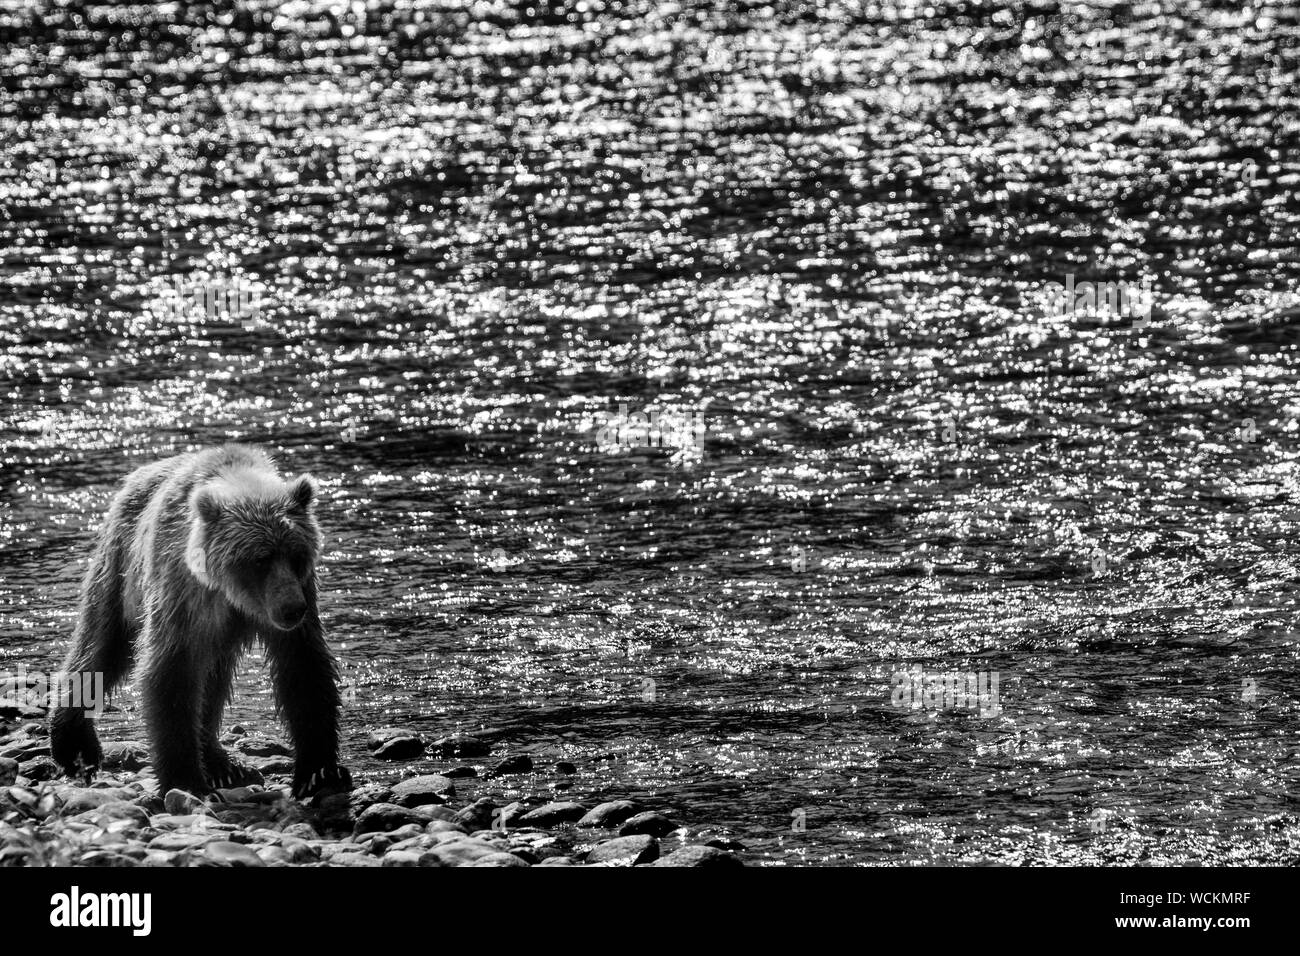 Adult Grizzly Bear walking along a river bank against a river sparkling in the sun, Ursus arctos horribilis, Brown Bear, North American, Canada, Stock Photo